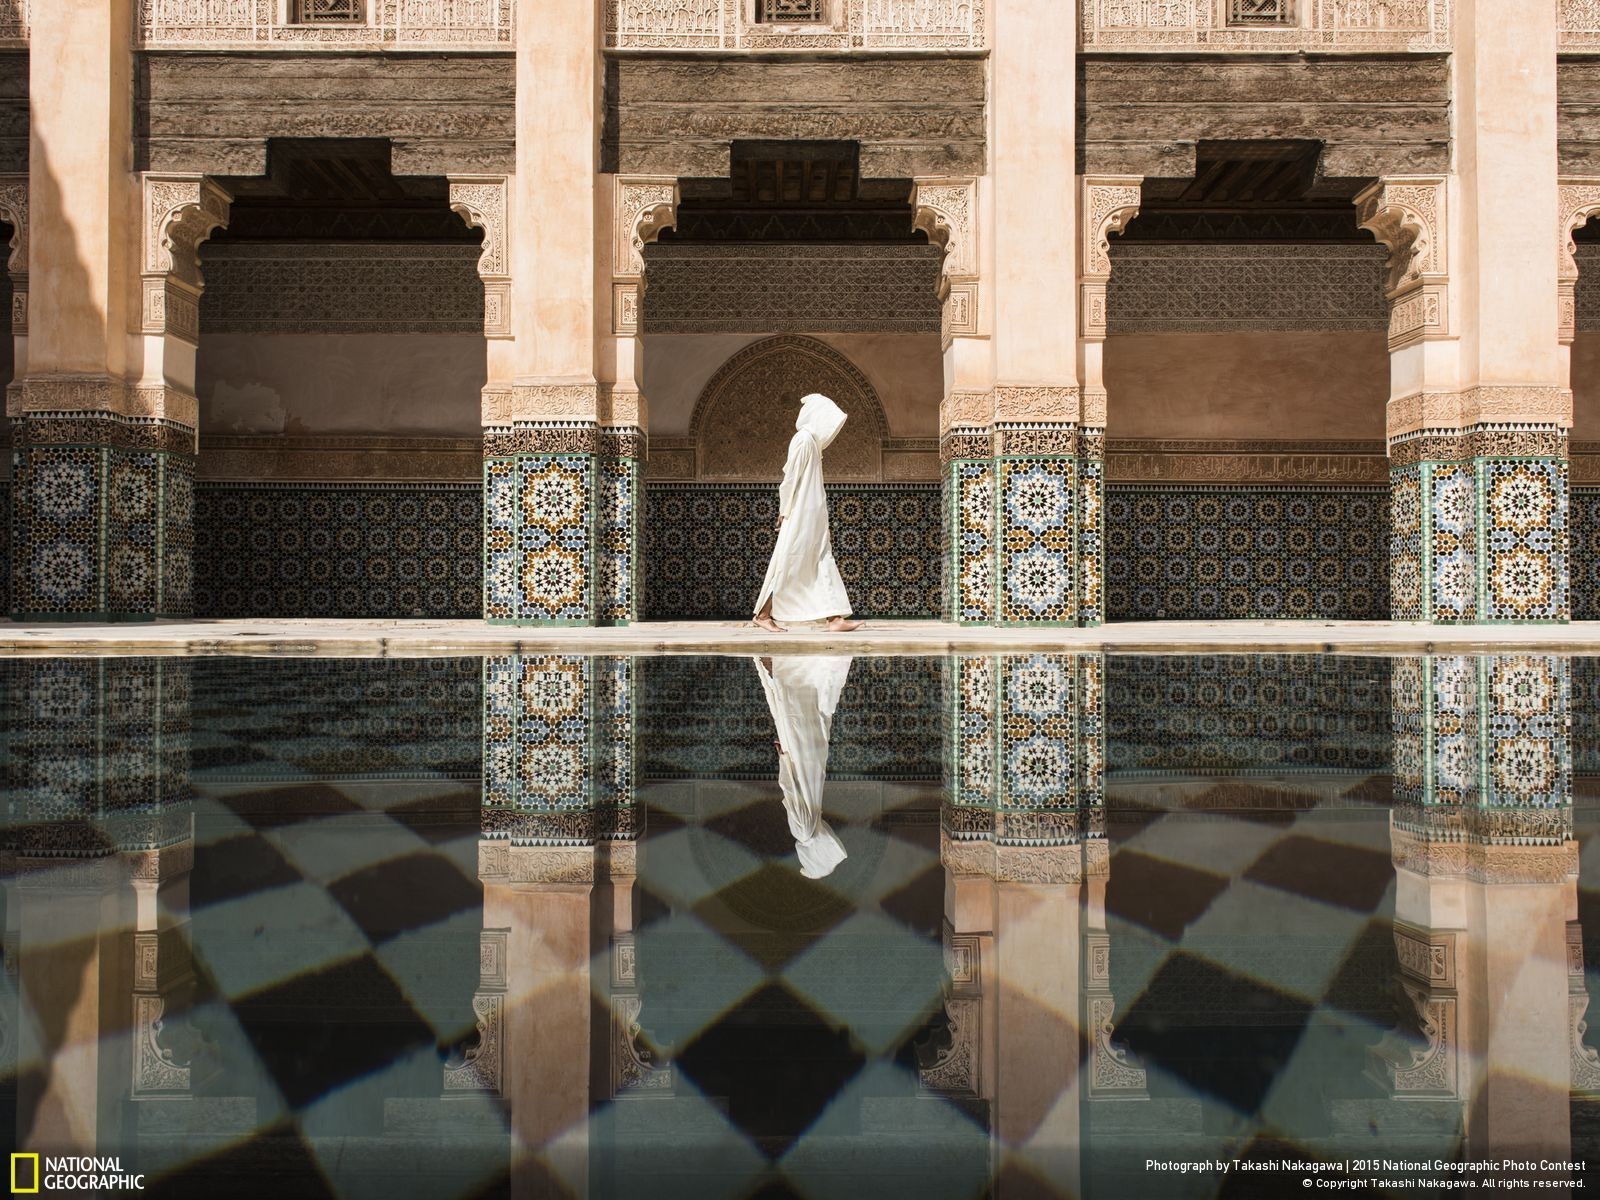 General 1600x1200 Marrakesh Morocco National Geographic 2015 (Year) reflection building